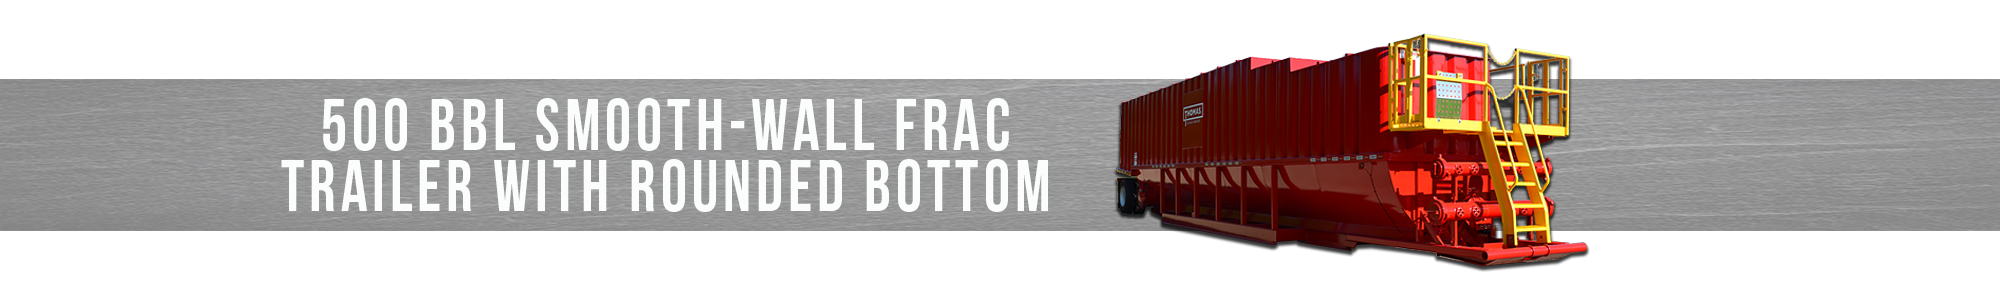 500 BBL Smooth-Wall Frac Trailer with Rounded Bottom